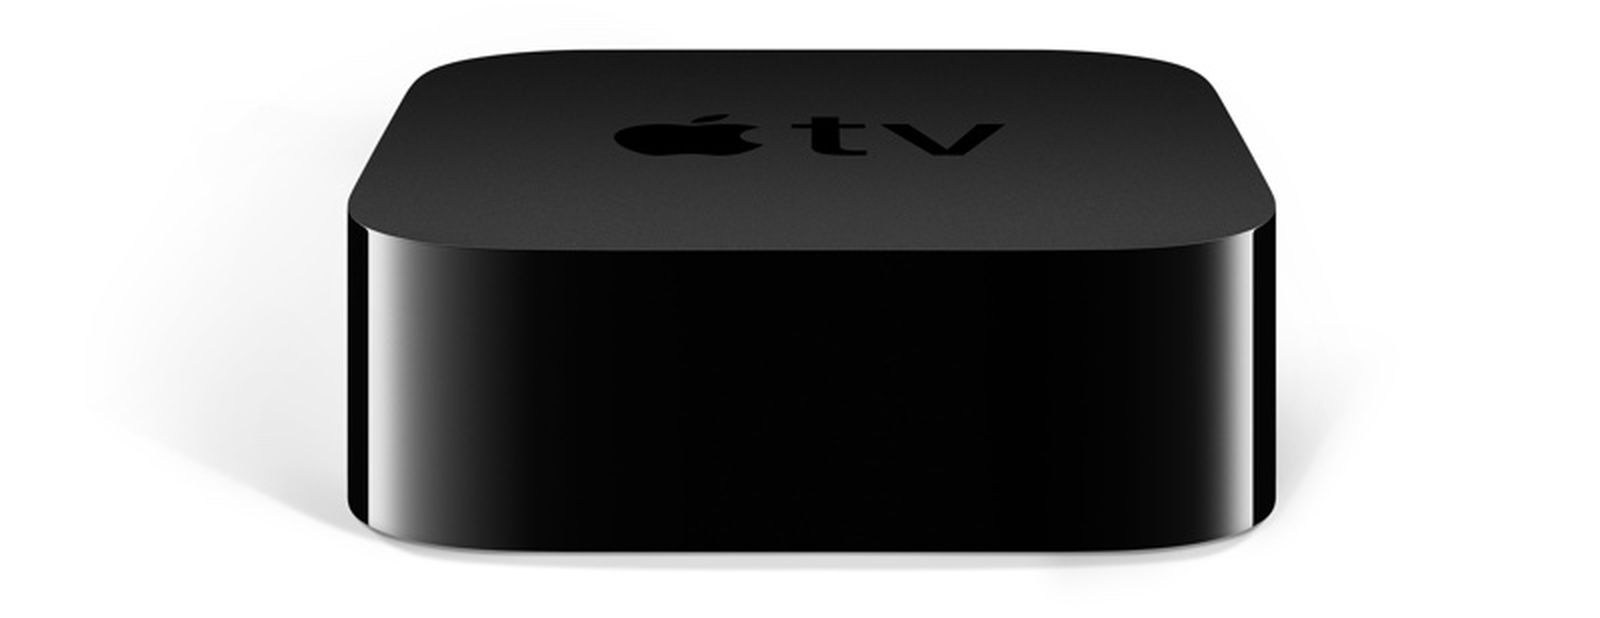 32gb-apple-tv-4k-marked-down-to-150-with-30-mail-in-rebate-macrumors